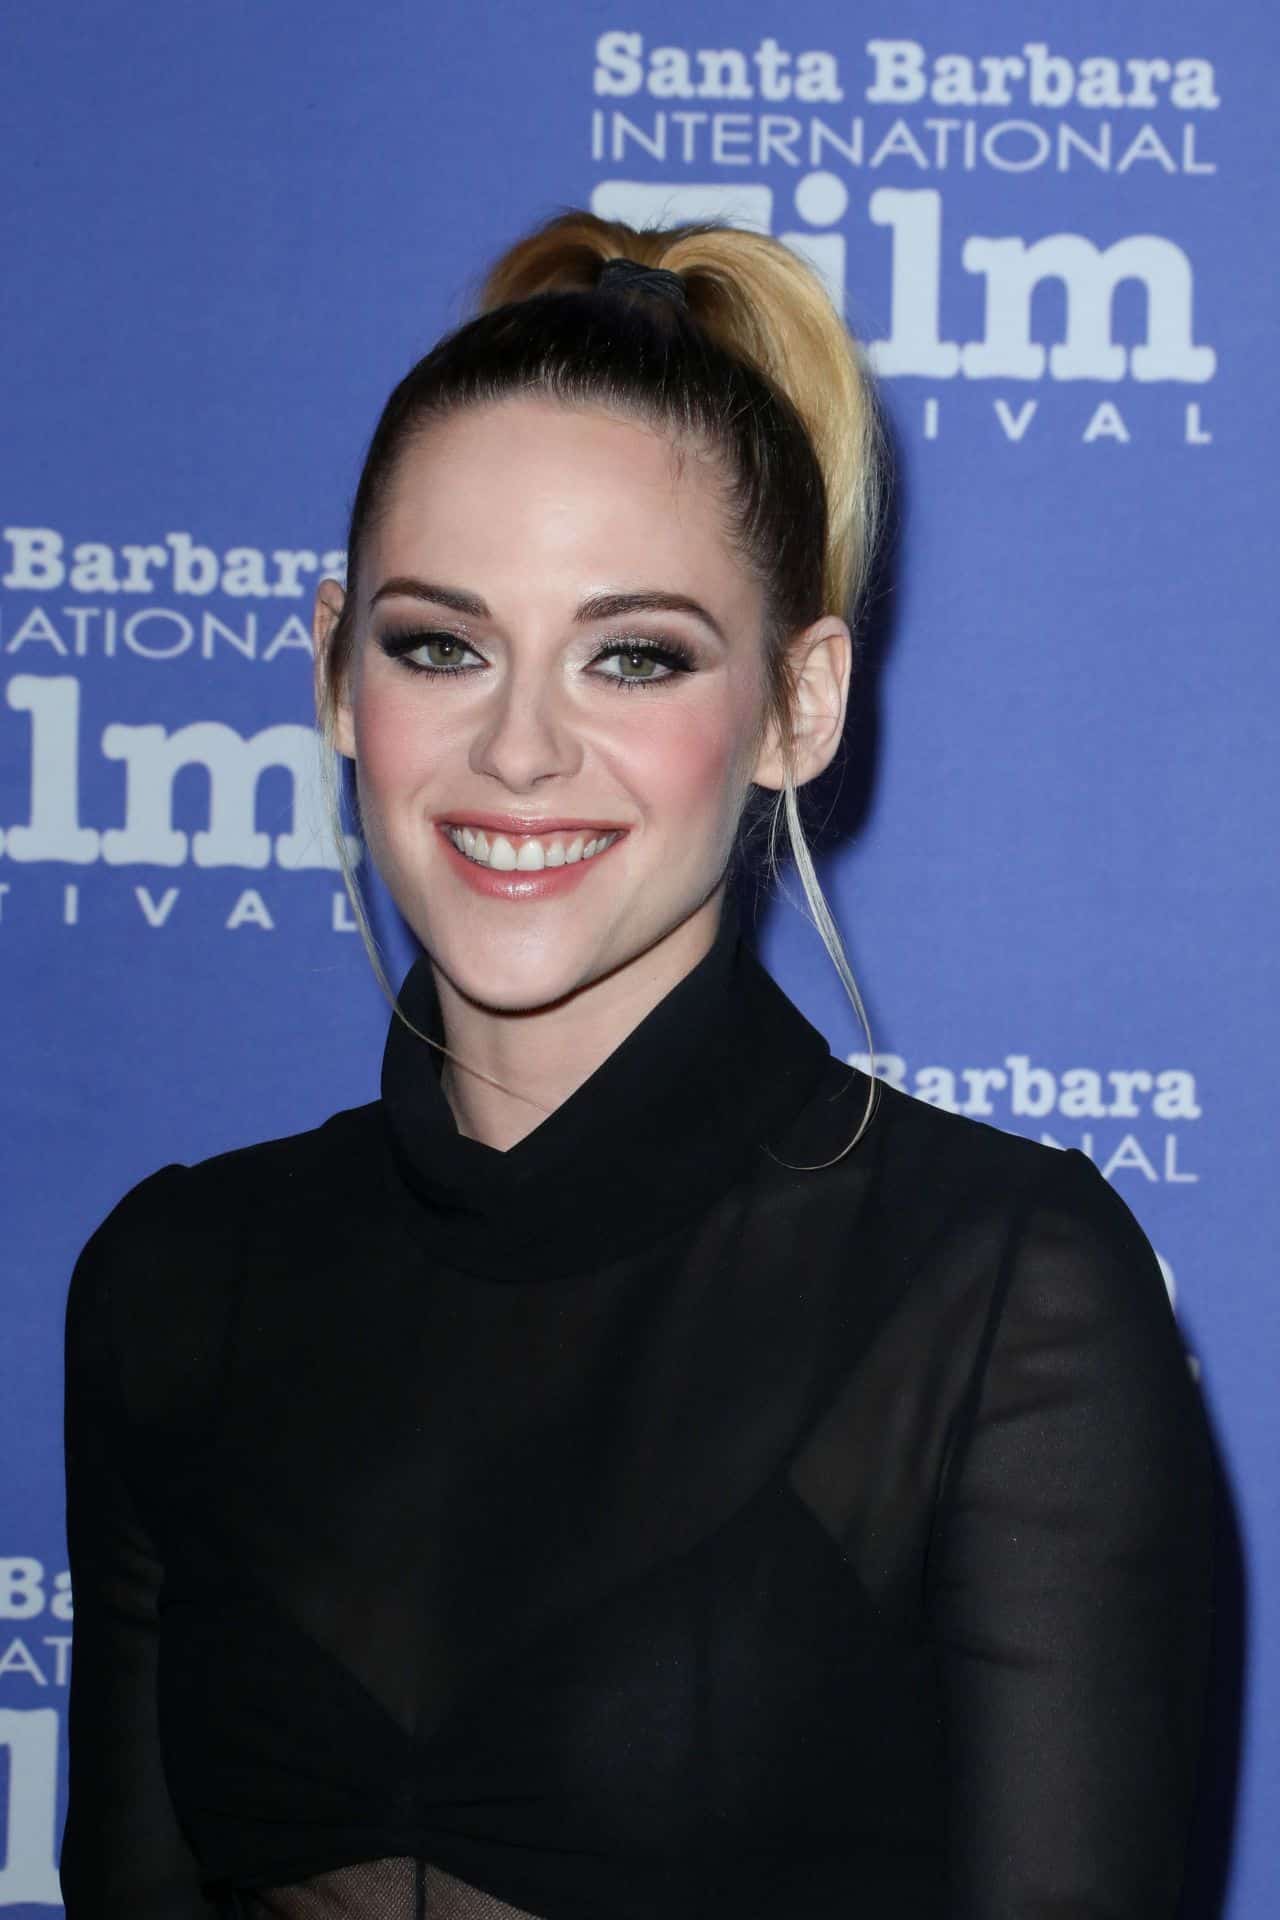 Kristen Stewart Looked Incredible in a Sheer Black Dress at the 2022 SBIFF